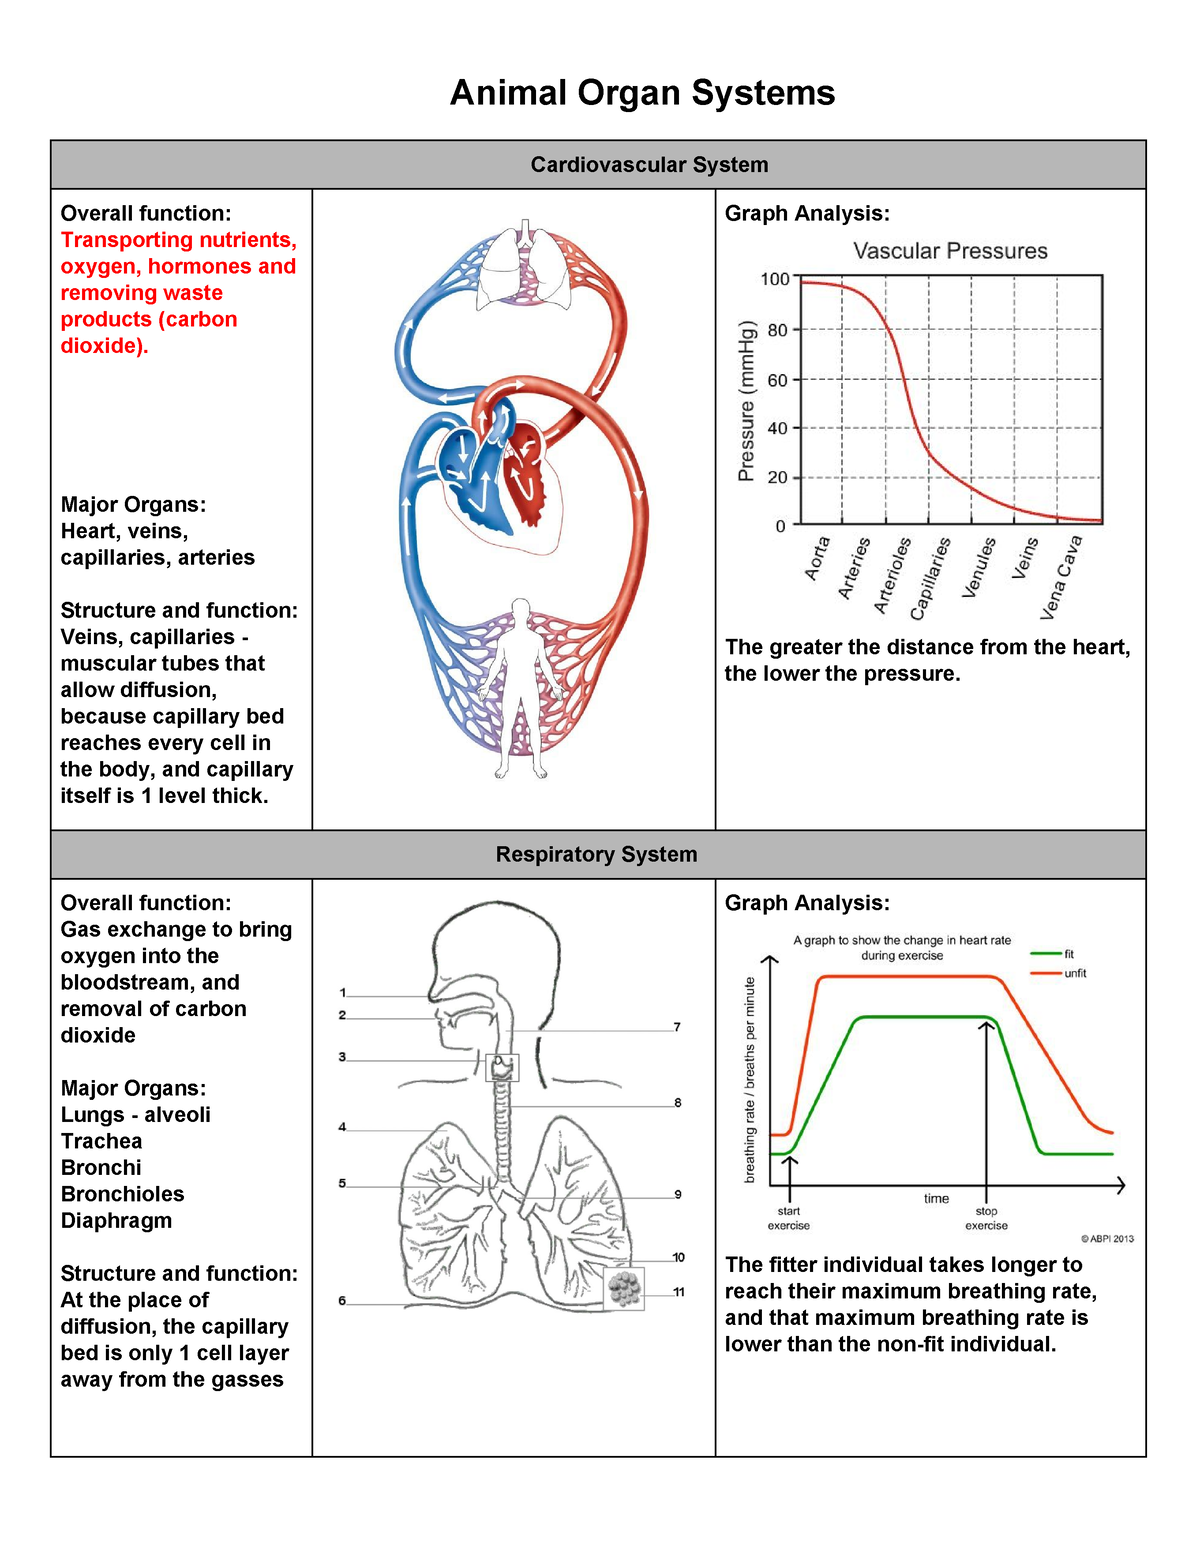 09-animal-systems-worksheets-p3-answers-animal-organ-systems-cardiovascular-system-overall